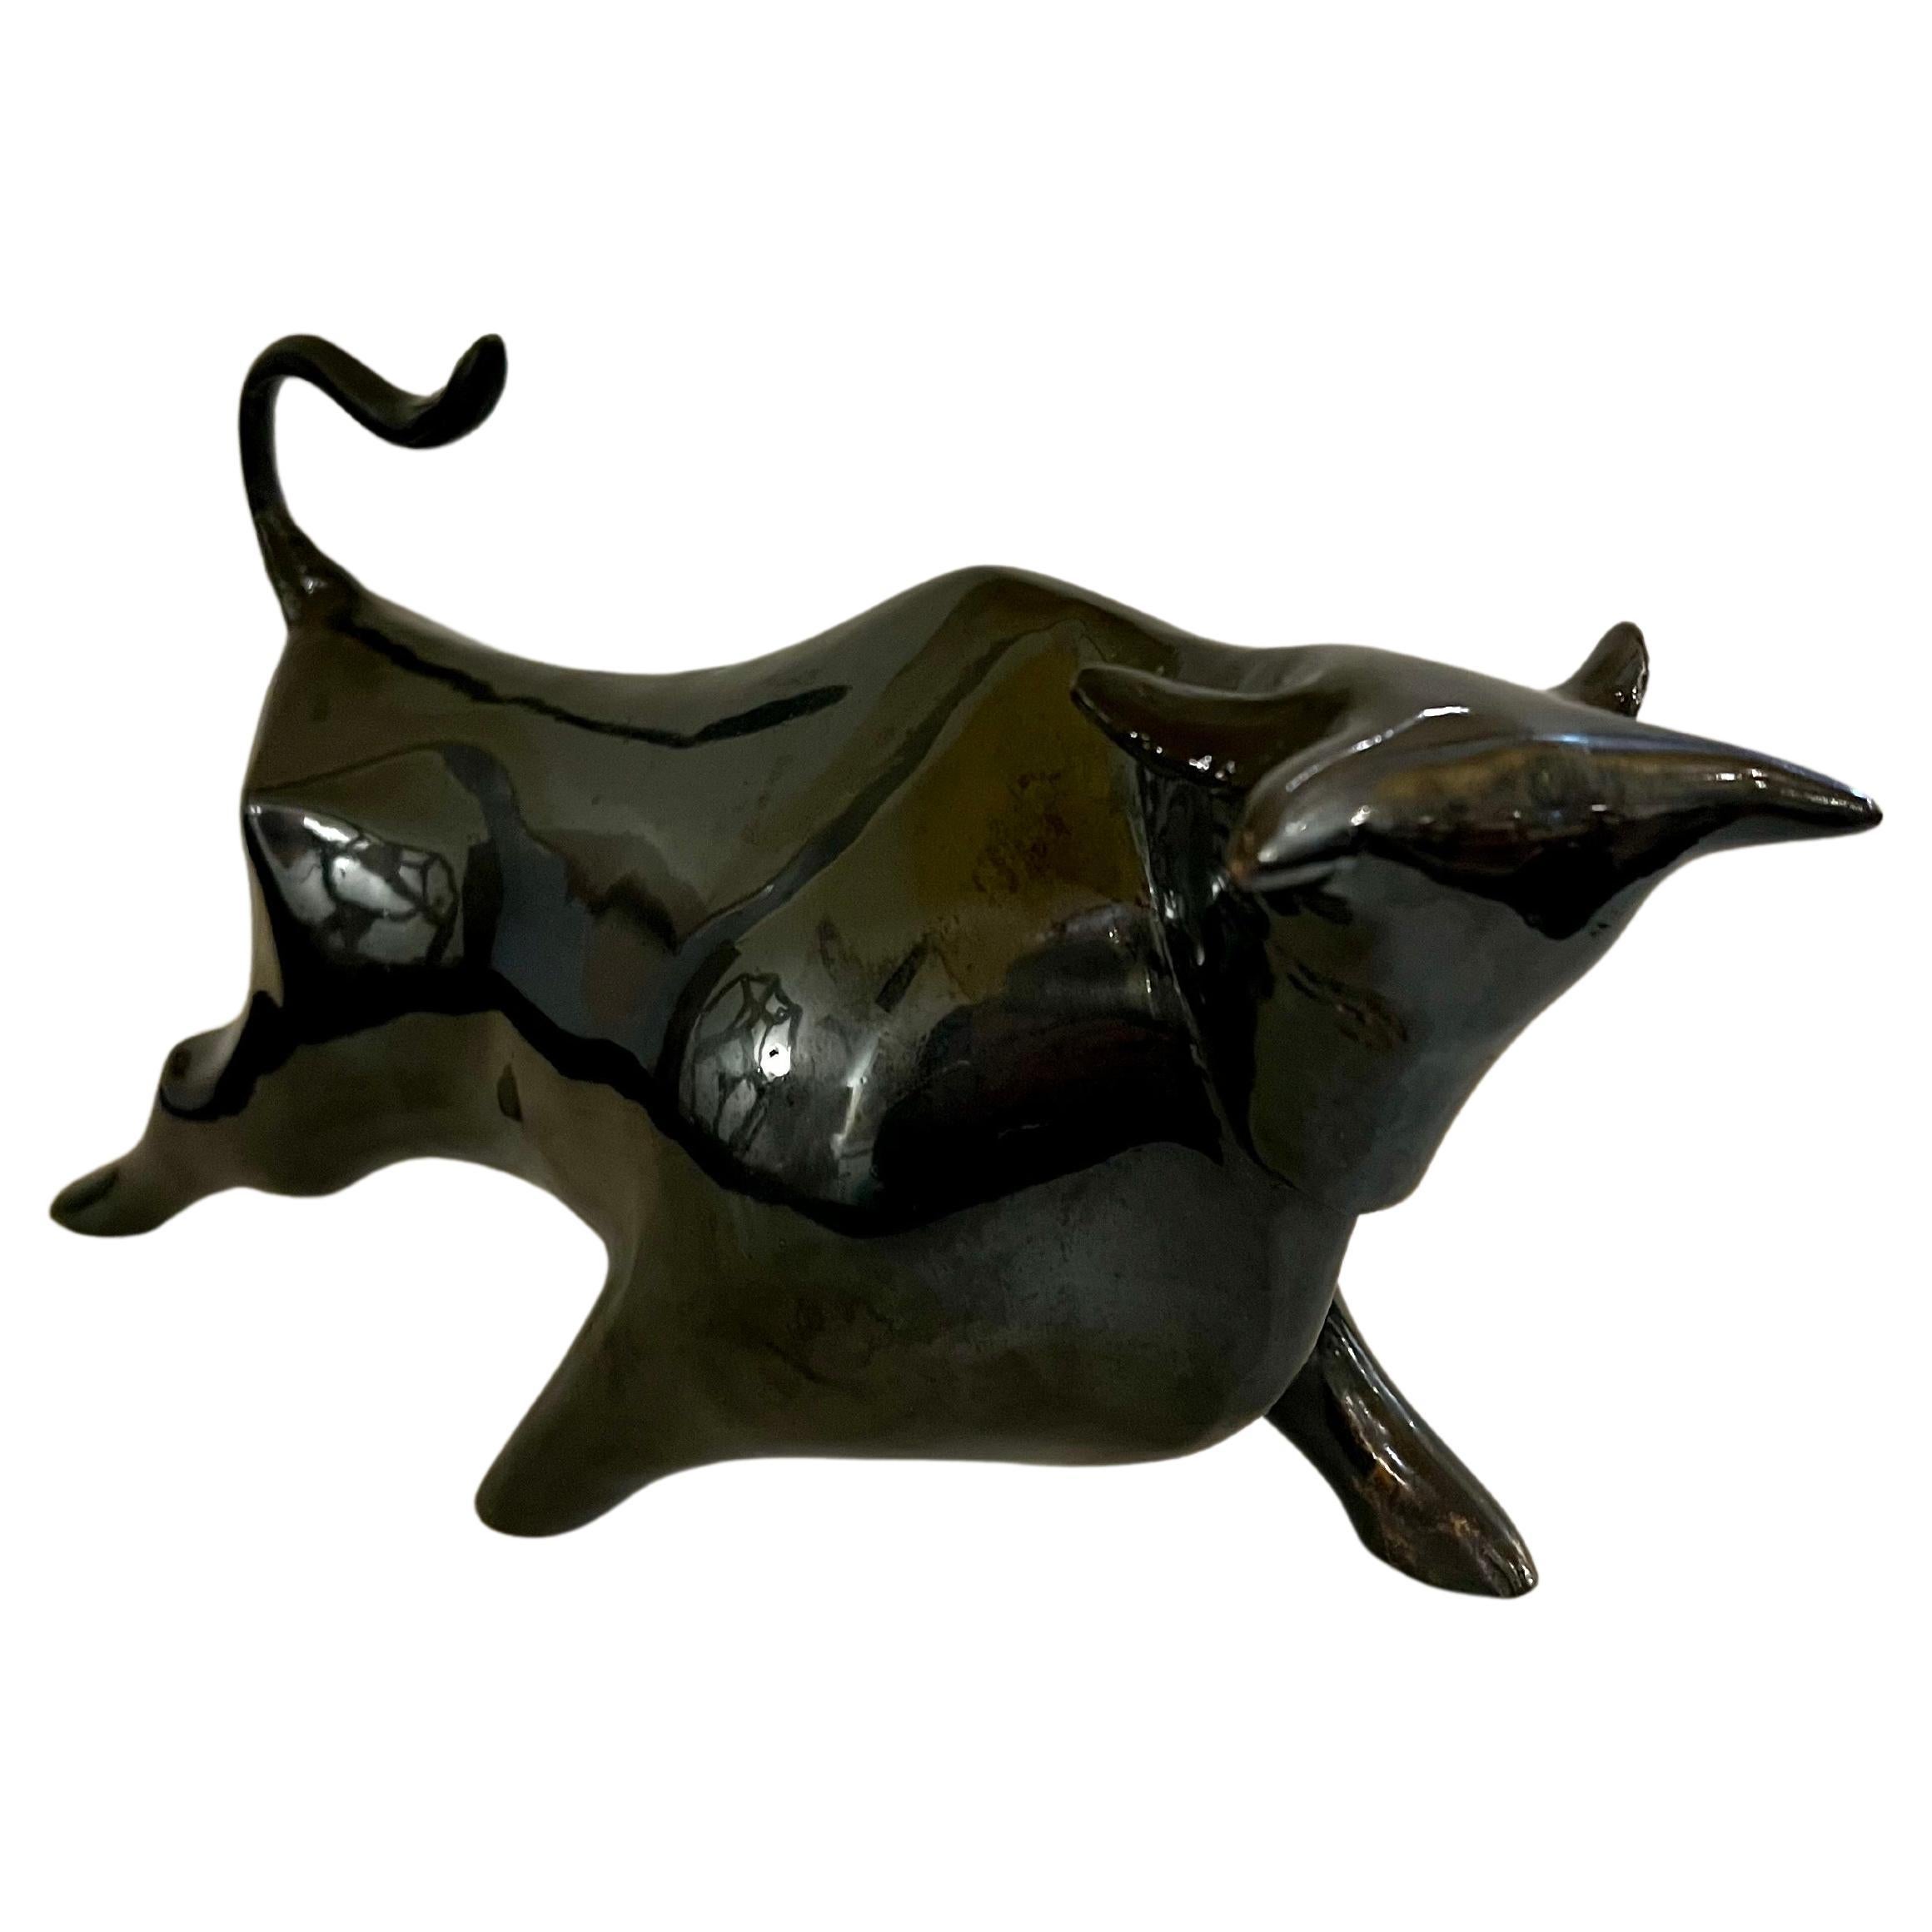 Majestic Brass & Enameled Finish Bull Sculpture For Sale